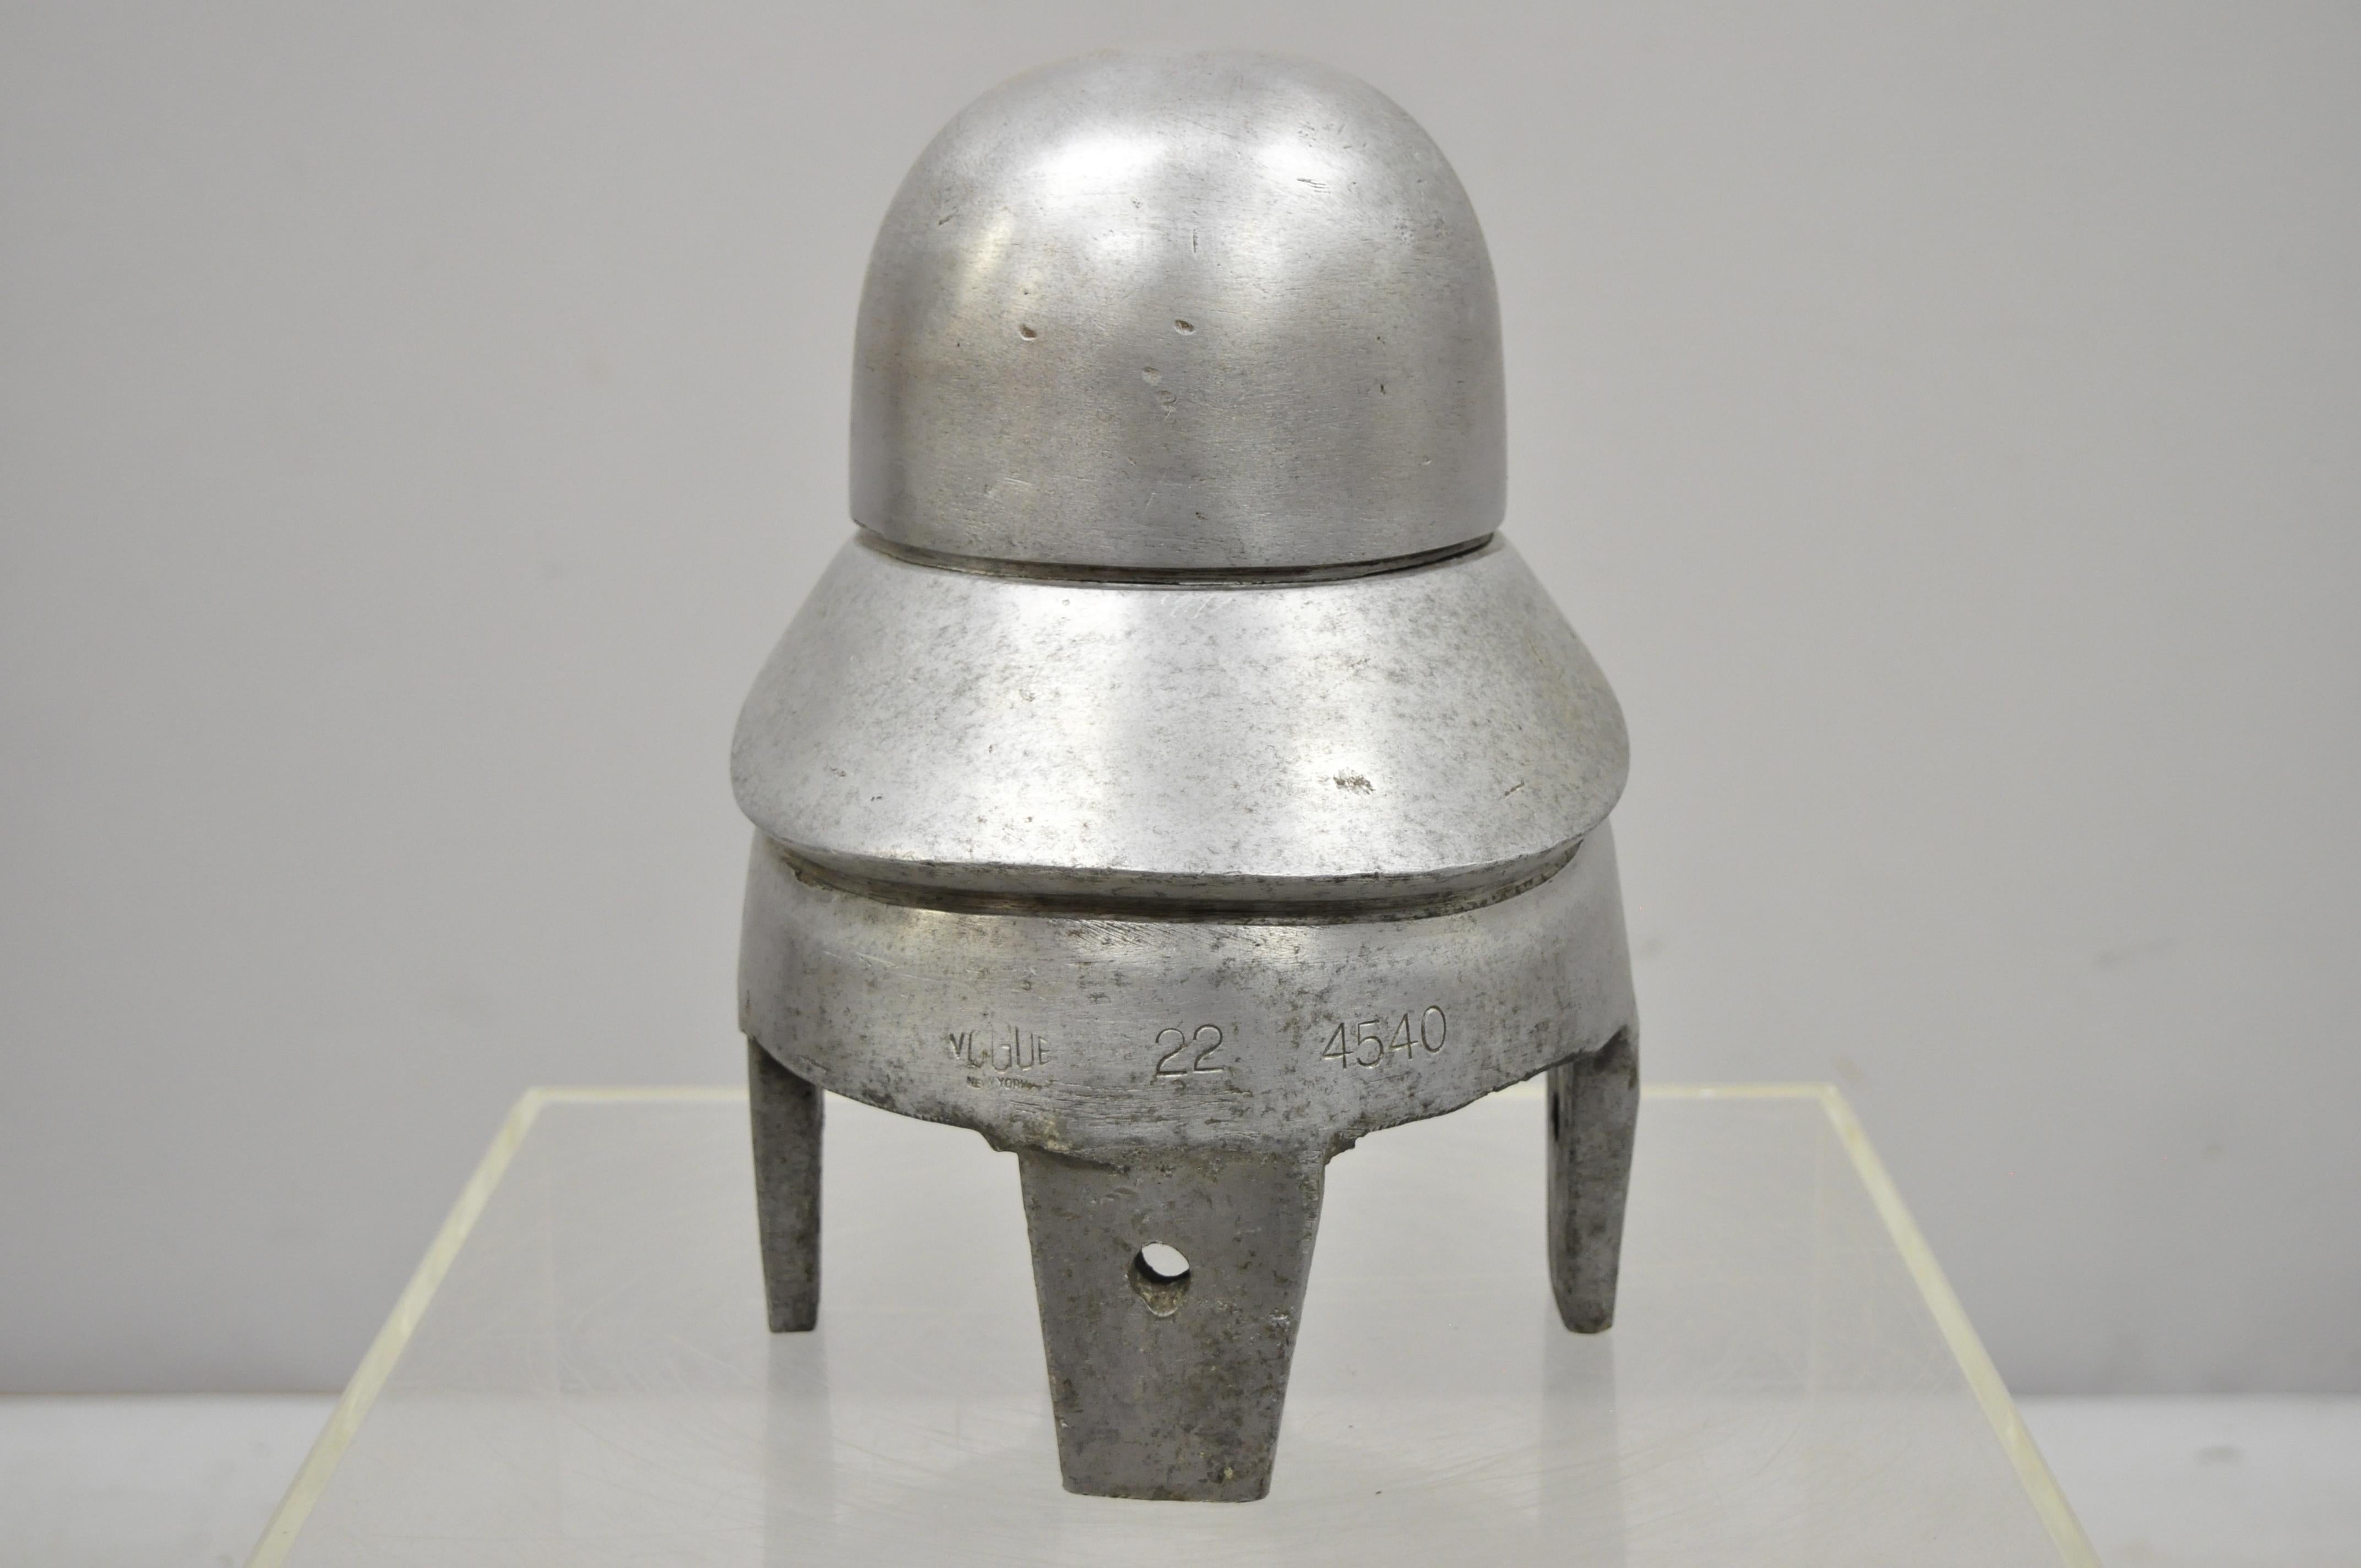 Vintage Vogue New York aluminum 22 450 woman's hat block mold form Millinery (D) listing is for (1) hat mold as pictured, circa mid-20th century. Measurements: 12